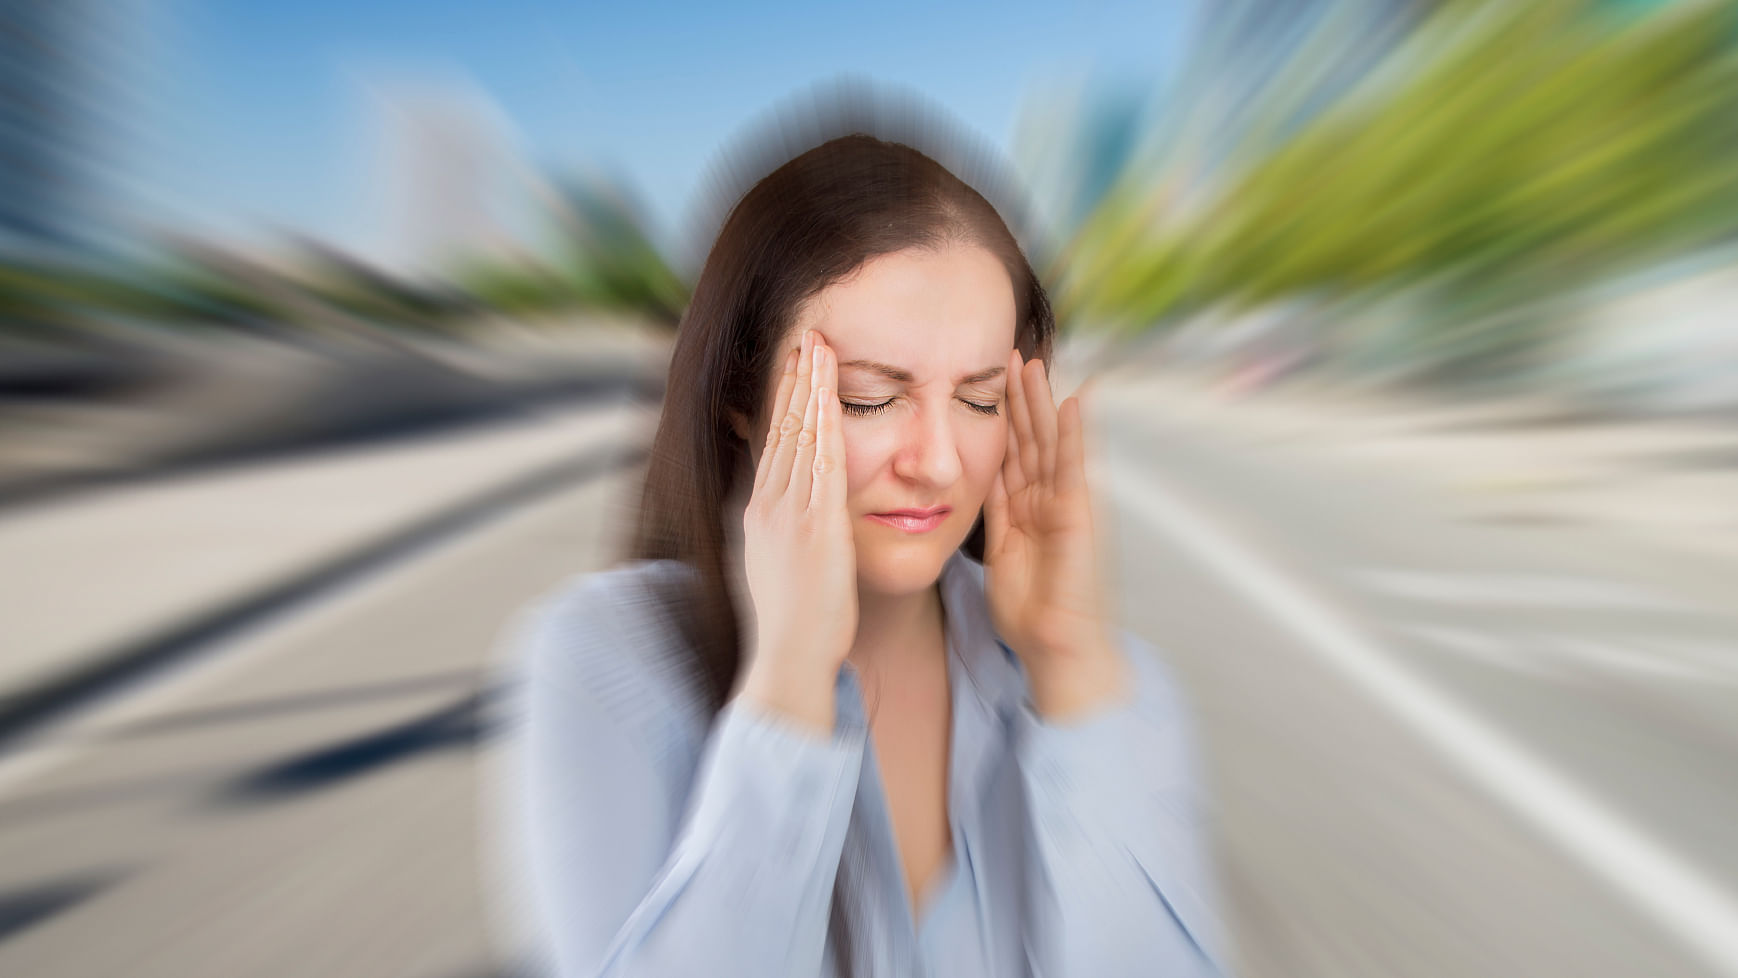 Migraines accompanied with visual auras linked to higher risk of atrial fibrillation